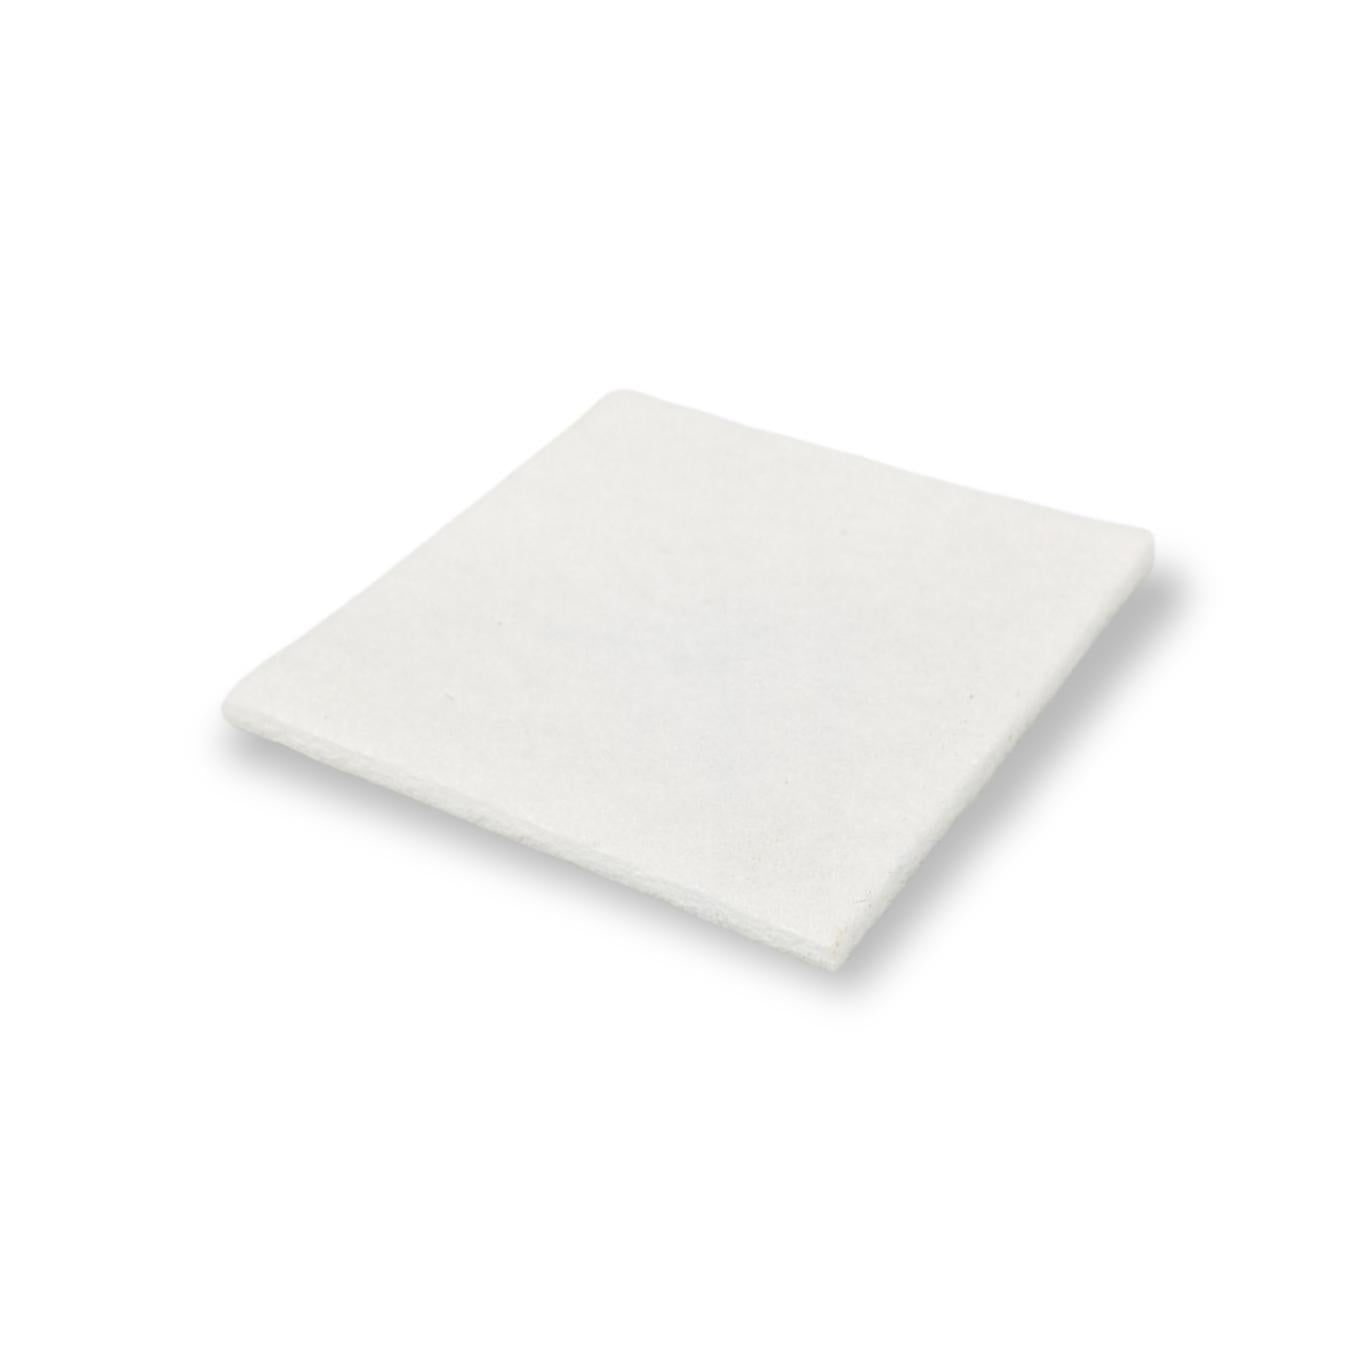 Felt Pads, Square Stick-On 55mm x 55mm, White - Made in Germany